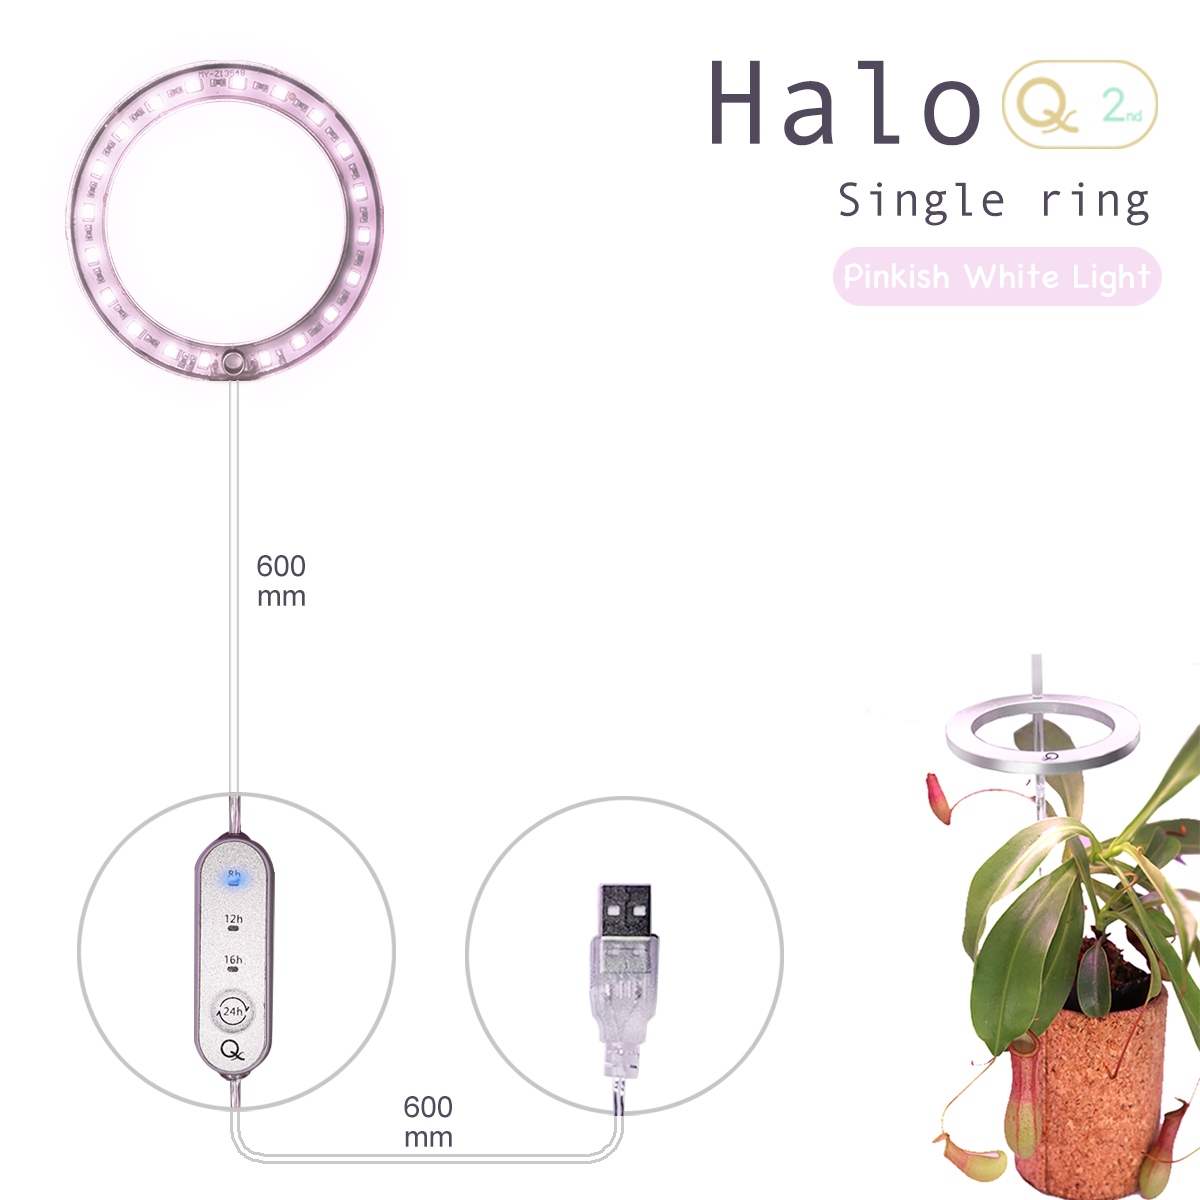 Single ring G2 with Timer Switch USB Small size LED Plant growth lamp Light for indoor plants from QX Factory wholesale